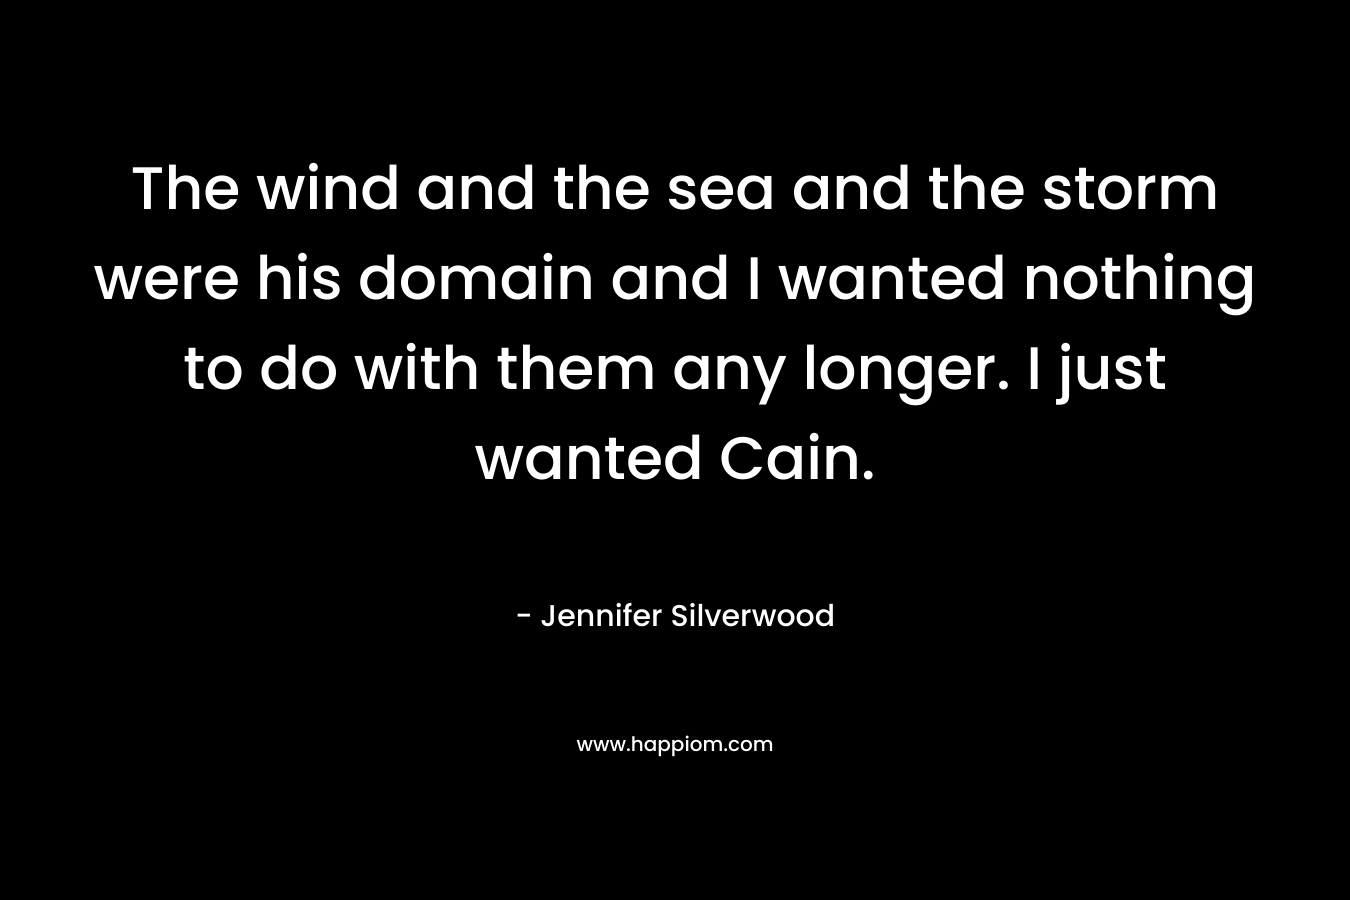 The wind and the sea and the storm were his domain and I wanted nothing to do with them any longer. I just wanted Cain.